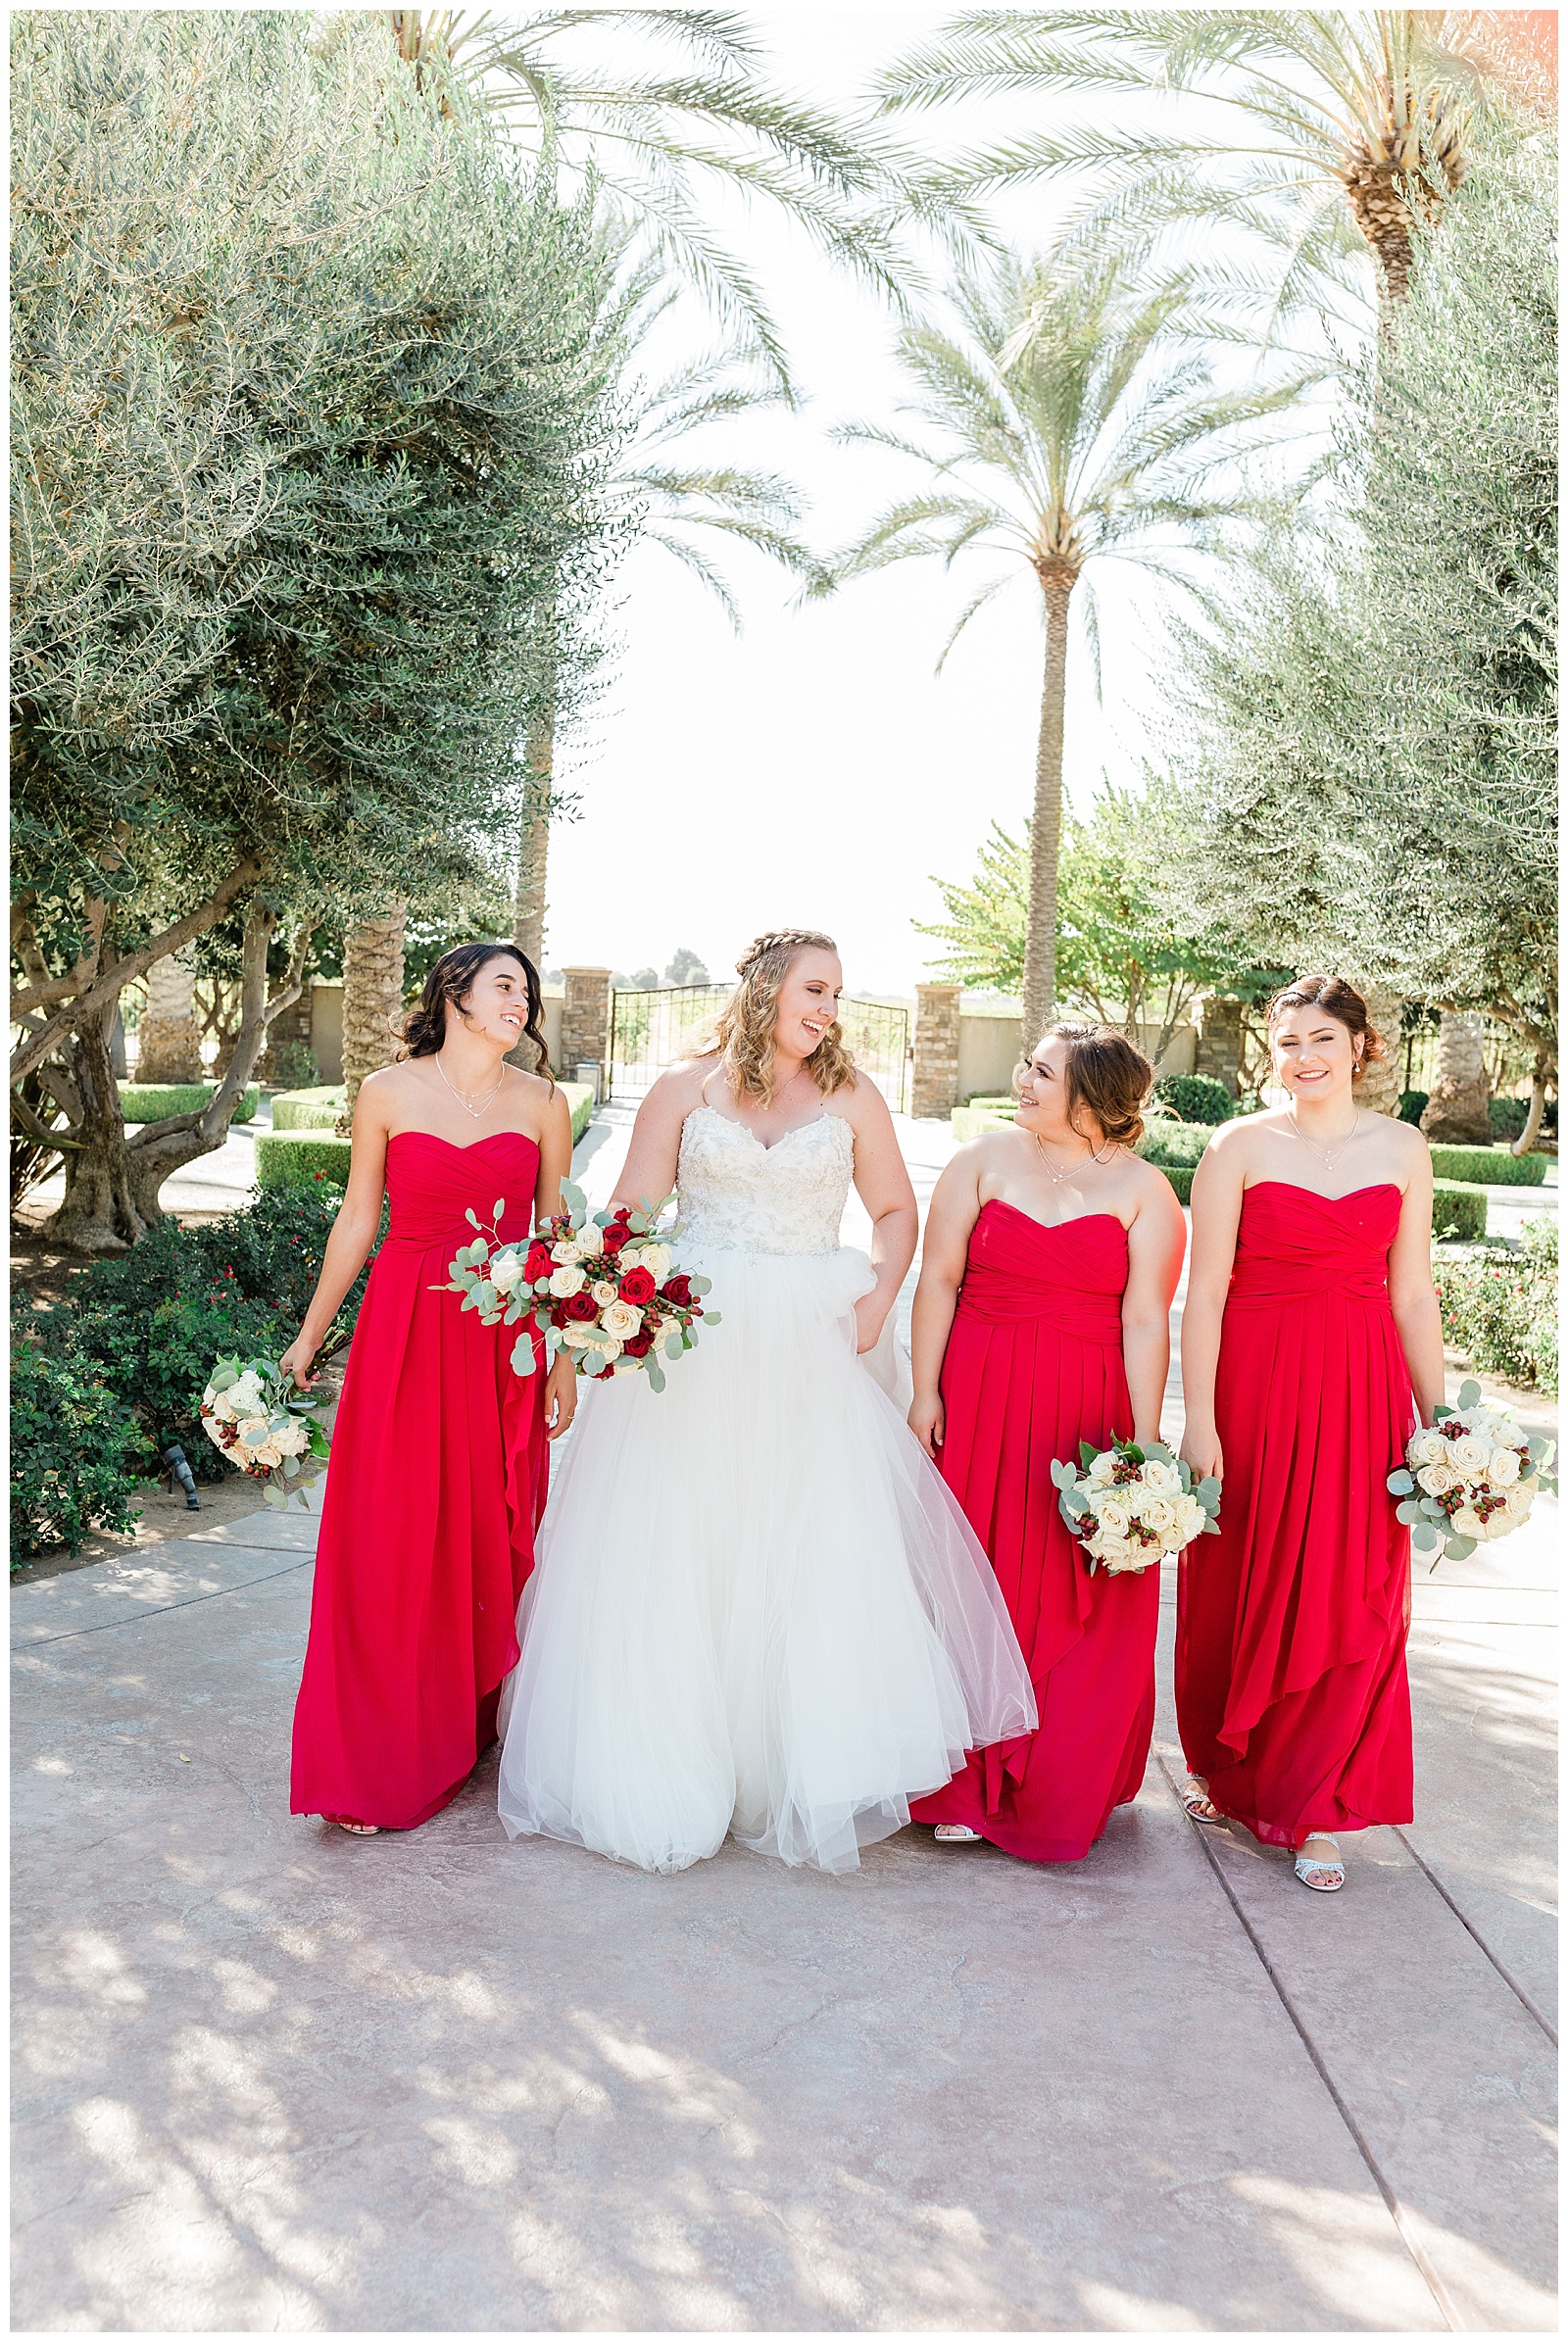 Bride and bridesmaids walking down the driveway of Tuscan Gardens Venue in Kingsburg, CA